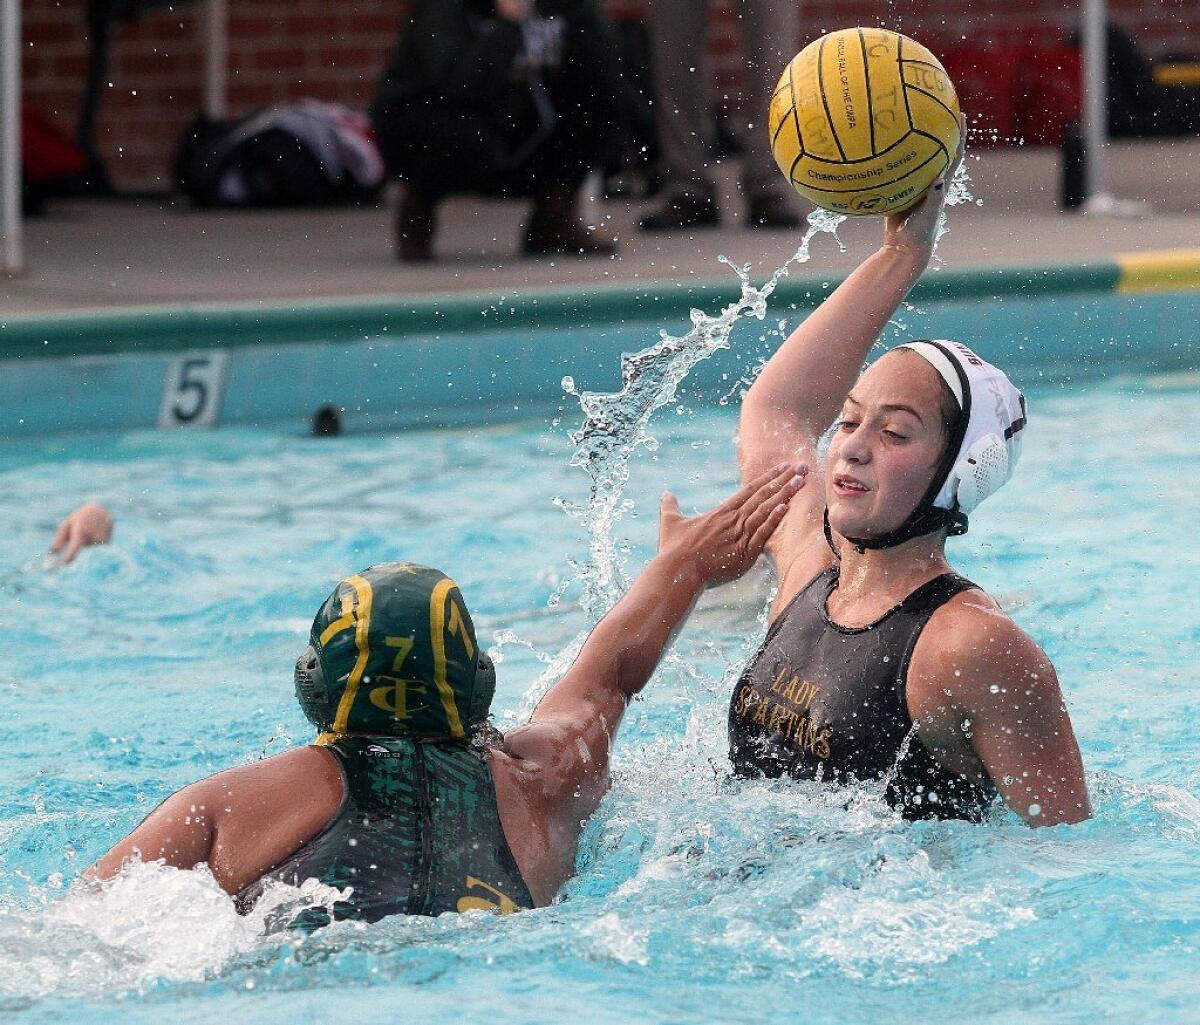 La Cañada's Genevieve Fraipoint and the Spartans will host Brea Olinda on Wednesday in the first round of the playoffs.